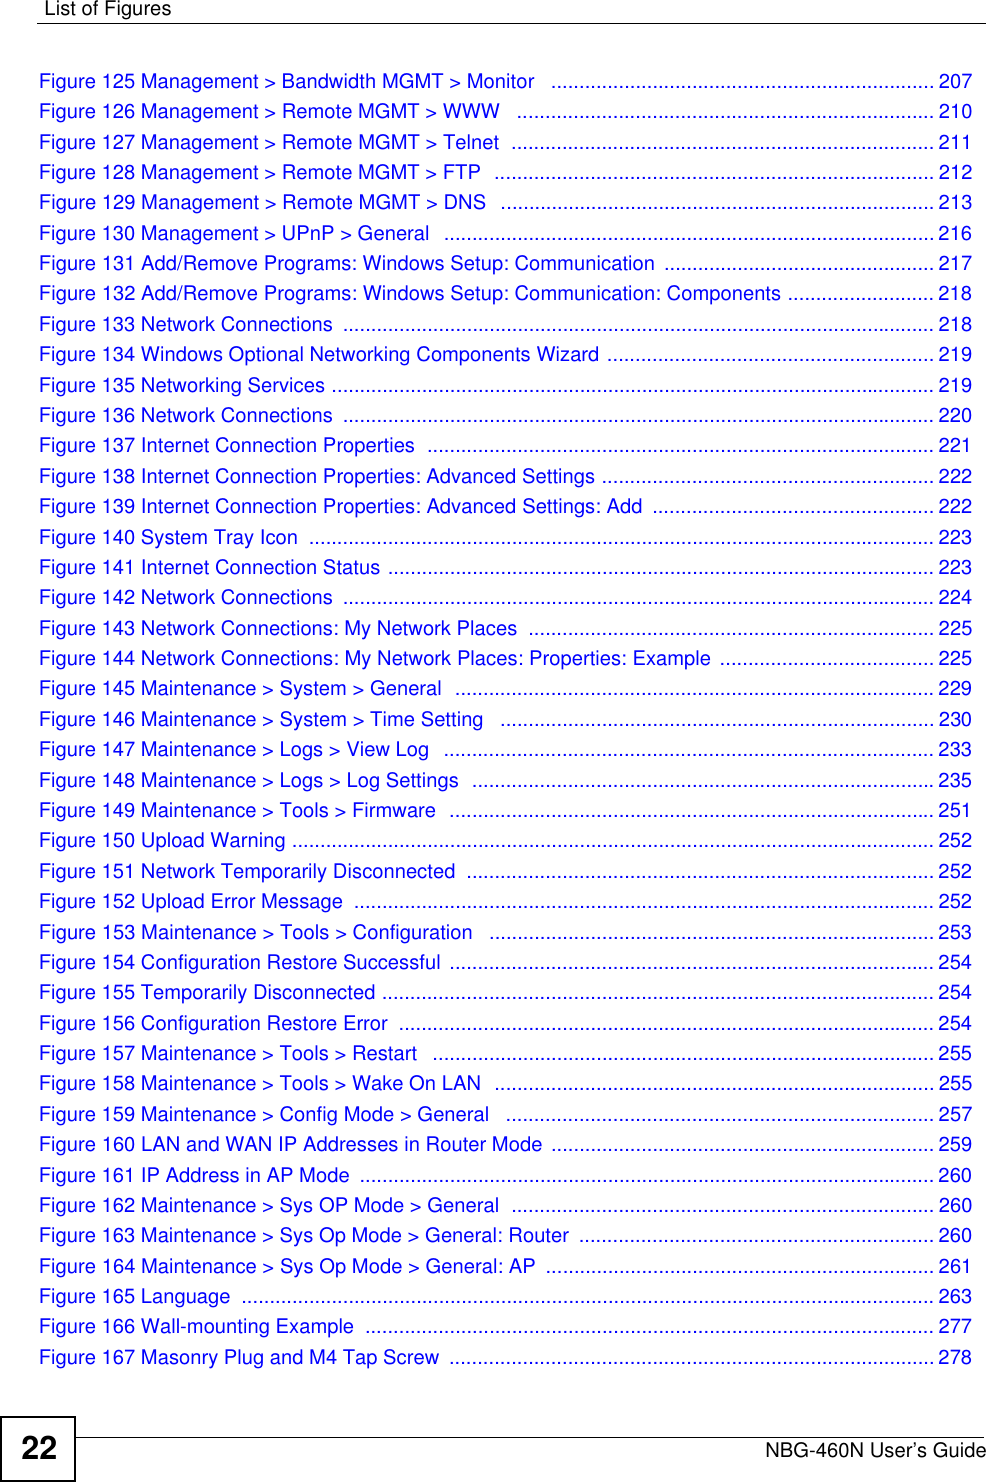 List of FiguresNBG-460N User’s Guide22Figure 125 Management &gt; Bandwidth MGMT &gt; Monitor   .................................................................... 207Figure 126 Management &gt; Remote MGMT &gt; WWW   .......................................................................... 210Figure 127 Management &gt; Remote MGMT &gt; Telnet  ........................................................................... 211Figure 128 Management &gt; Remote MGMT &gt; FTP  .............................................................................. 212Figure 129 Management &gt; Remote MGMT &gt; DNS   ............................................................................. 213Figure 130 Management &gt; UPnP &gt; General  ....................................................................................... 216Figure 131 Add/Remove Programs: Windows Setup: Communication ................................................ 217Figure 132 Add/Remove Programs: Windows Setup: Communication: Components .......................... 218Figure 133 Network Connections  ......................................................................................................... 218Figure 134 Windows Optional Networking Components Wizard .......................................................... 219Figure 135 Networking Services ........................................................................................................... 219Figure 136 Network Connections  ......................................................................................................... 220Figure 137 Internet Connection Properties  .......................................................................................... 221Figure 138 Internet Connection Properties: Advanced Settings ........................................................... 222Figure 139 Internet Connection Properties: Advanced Settings: Add  .................................................. 222Figure 140 System Tray Icon  ............................................................................................................... 223Figure 141 Internet Connection Status ................................................................................................. 223Figure 142 Network Connections  ......................................................................................................... 224Figure 143 Network Connections: My Network Places  ........................................................................ 225Figure 144 Network Connections: My Network Places: Properties: Example ...................................... 225Figure 145 Maintenance &gt; System &gt; General  .....................................................................................229Figure 146 Maintenance &gt; System &gt; Time Setting   ............................................................................. 230Figure 147 Maintenance &gt; Logs &gt; View Log   ....................................................................................... 233Figure 148 Maintenance &gt; Logs &gt; Log Settings  ..................................................................................235Figure 149 Maintenance &gt; Tools &gt; Firmware  ...................................................................................... 251Figure 150 Upload Warning .................................................................................................................. 252Figure 151 Network Temporarily Disconnected  ................................................................................... 252Figure 152 Upload Error Message  ....................................................................................................... 252Figure 153 Maintenance &gt; Tools &gt; Configuration   ............................................................................... 253Figure 154 Configuration Restore Successful  ...................................................................................... 254Figure 155 Temporarily Disconnected .................................................................................................. 254Figure 156 Configuration Restore Error  ............................................................................................... 254Figure 157 Maintenance &gt; Tools &gt; Restart   ......................................................................................... 255Figure 158 Maintenance &gt; Tools &gt; Wake On LAN  .............................................................................. 255Figure 159 Maintenance &gt; Config Mode &gt; General   ............................................................................ 257Figure 160 LAN and WAN IP Addresses in Router Mode .................................................................... 259Figure 161 IP Address in AP Mode  ...................................................................................................... 260Figure 162 Maintenance &gt; Sys OP Mode &gt; General  ........................................................................... 260Figure 163 Maintenance &gt; Sys Op Mode &gt; General: Router  ............................................................... 260Figure 164 Maintenance &gt; Sys Op Mode &gt; General: AP  ..................................................................... 261Figure 165 Language  ........................................................................................................................... 263Figure 166 Wall-mounting Example  ..................................................................................................... 277Figure 167 Masonry Plug and M4 Tap Screw  ...................................................................................... 278